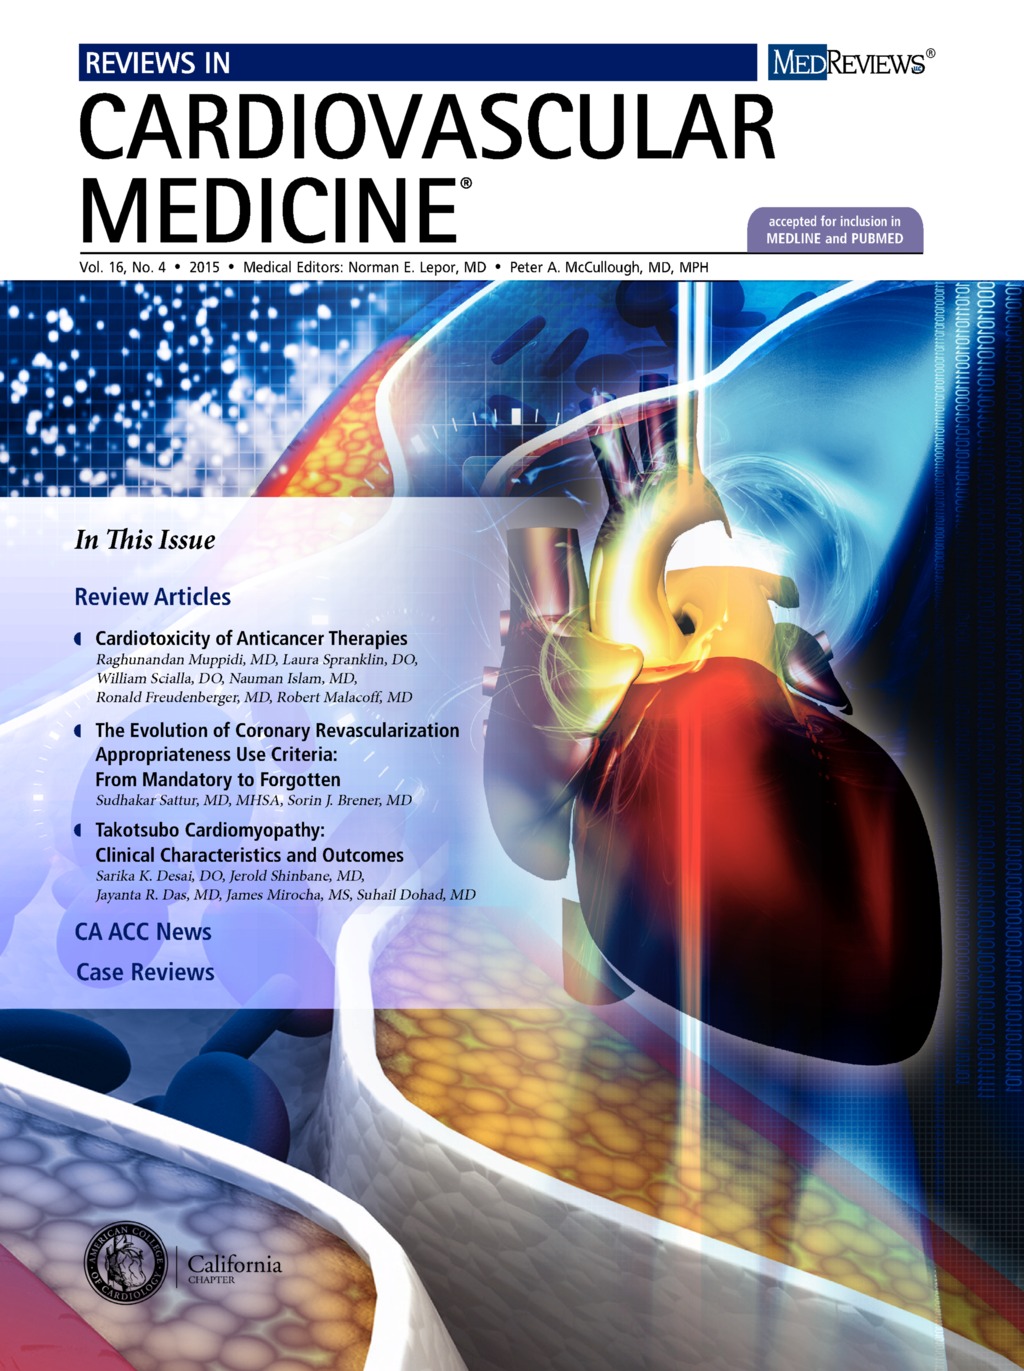 a systematic literature review of cardiovascular event utilities